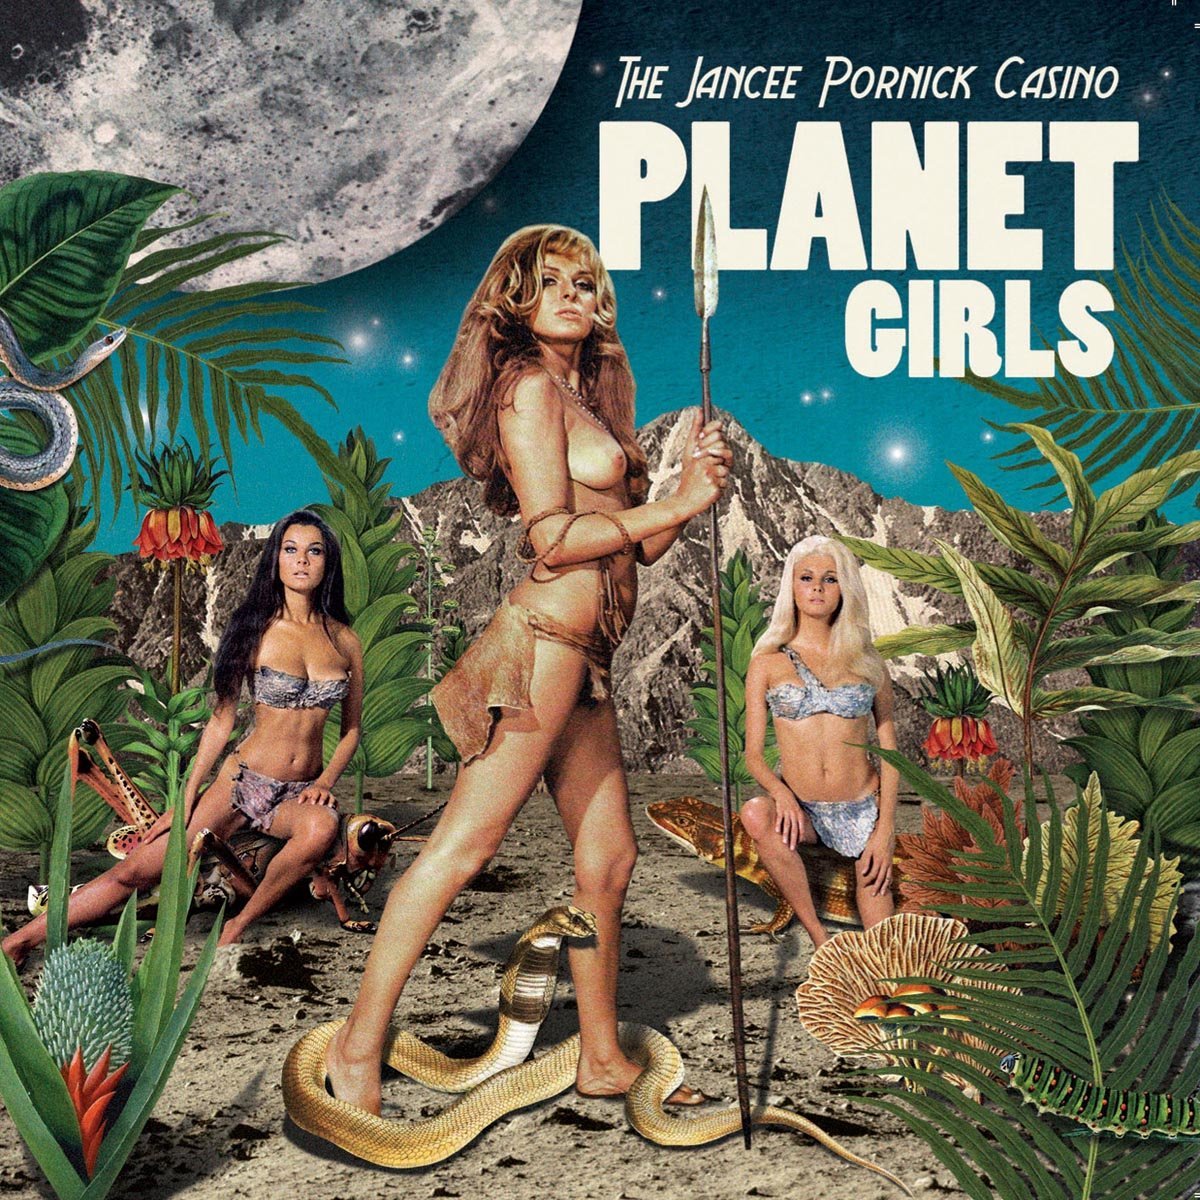 You are currently viewing THE JANCEE PORNICK CASINO – Planet girls